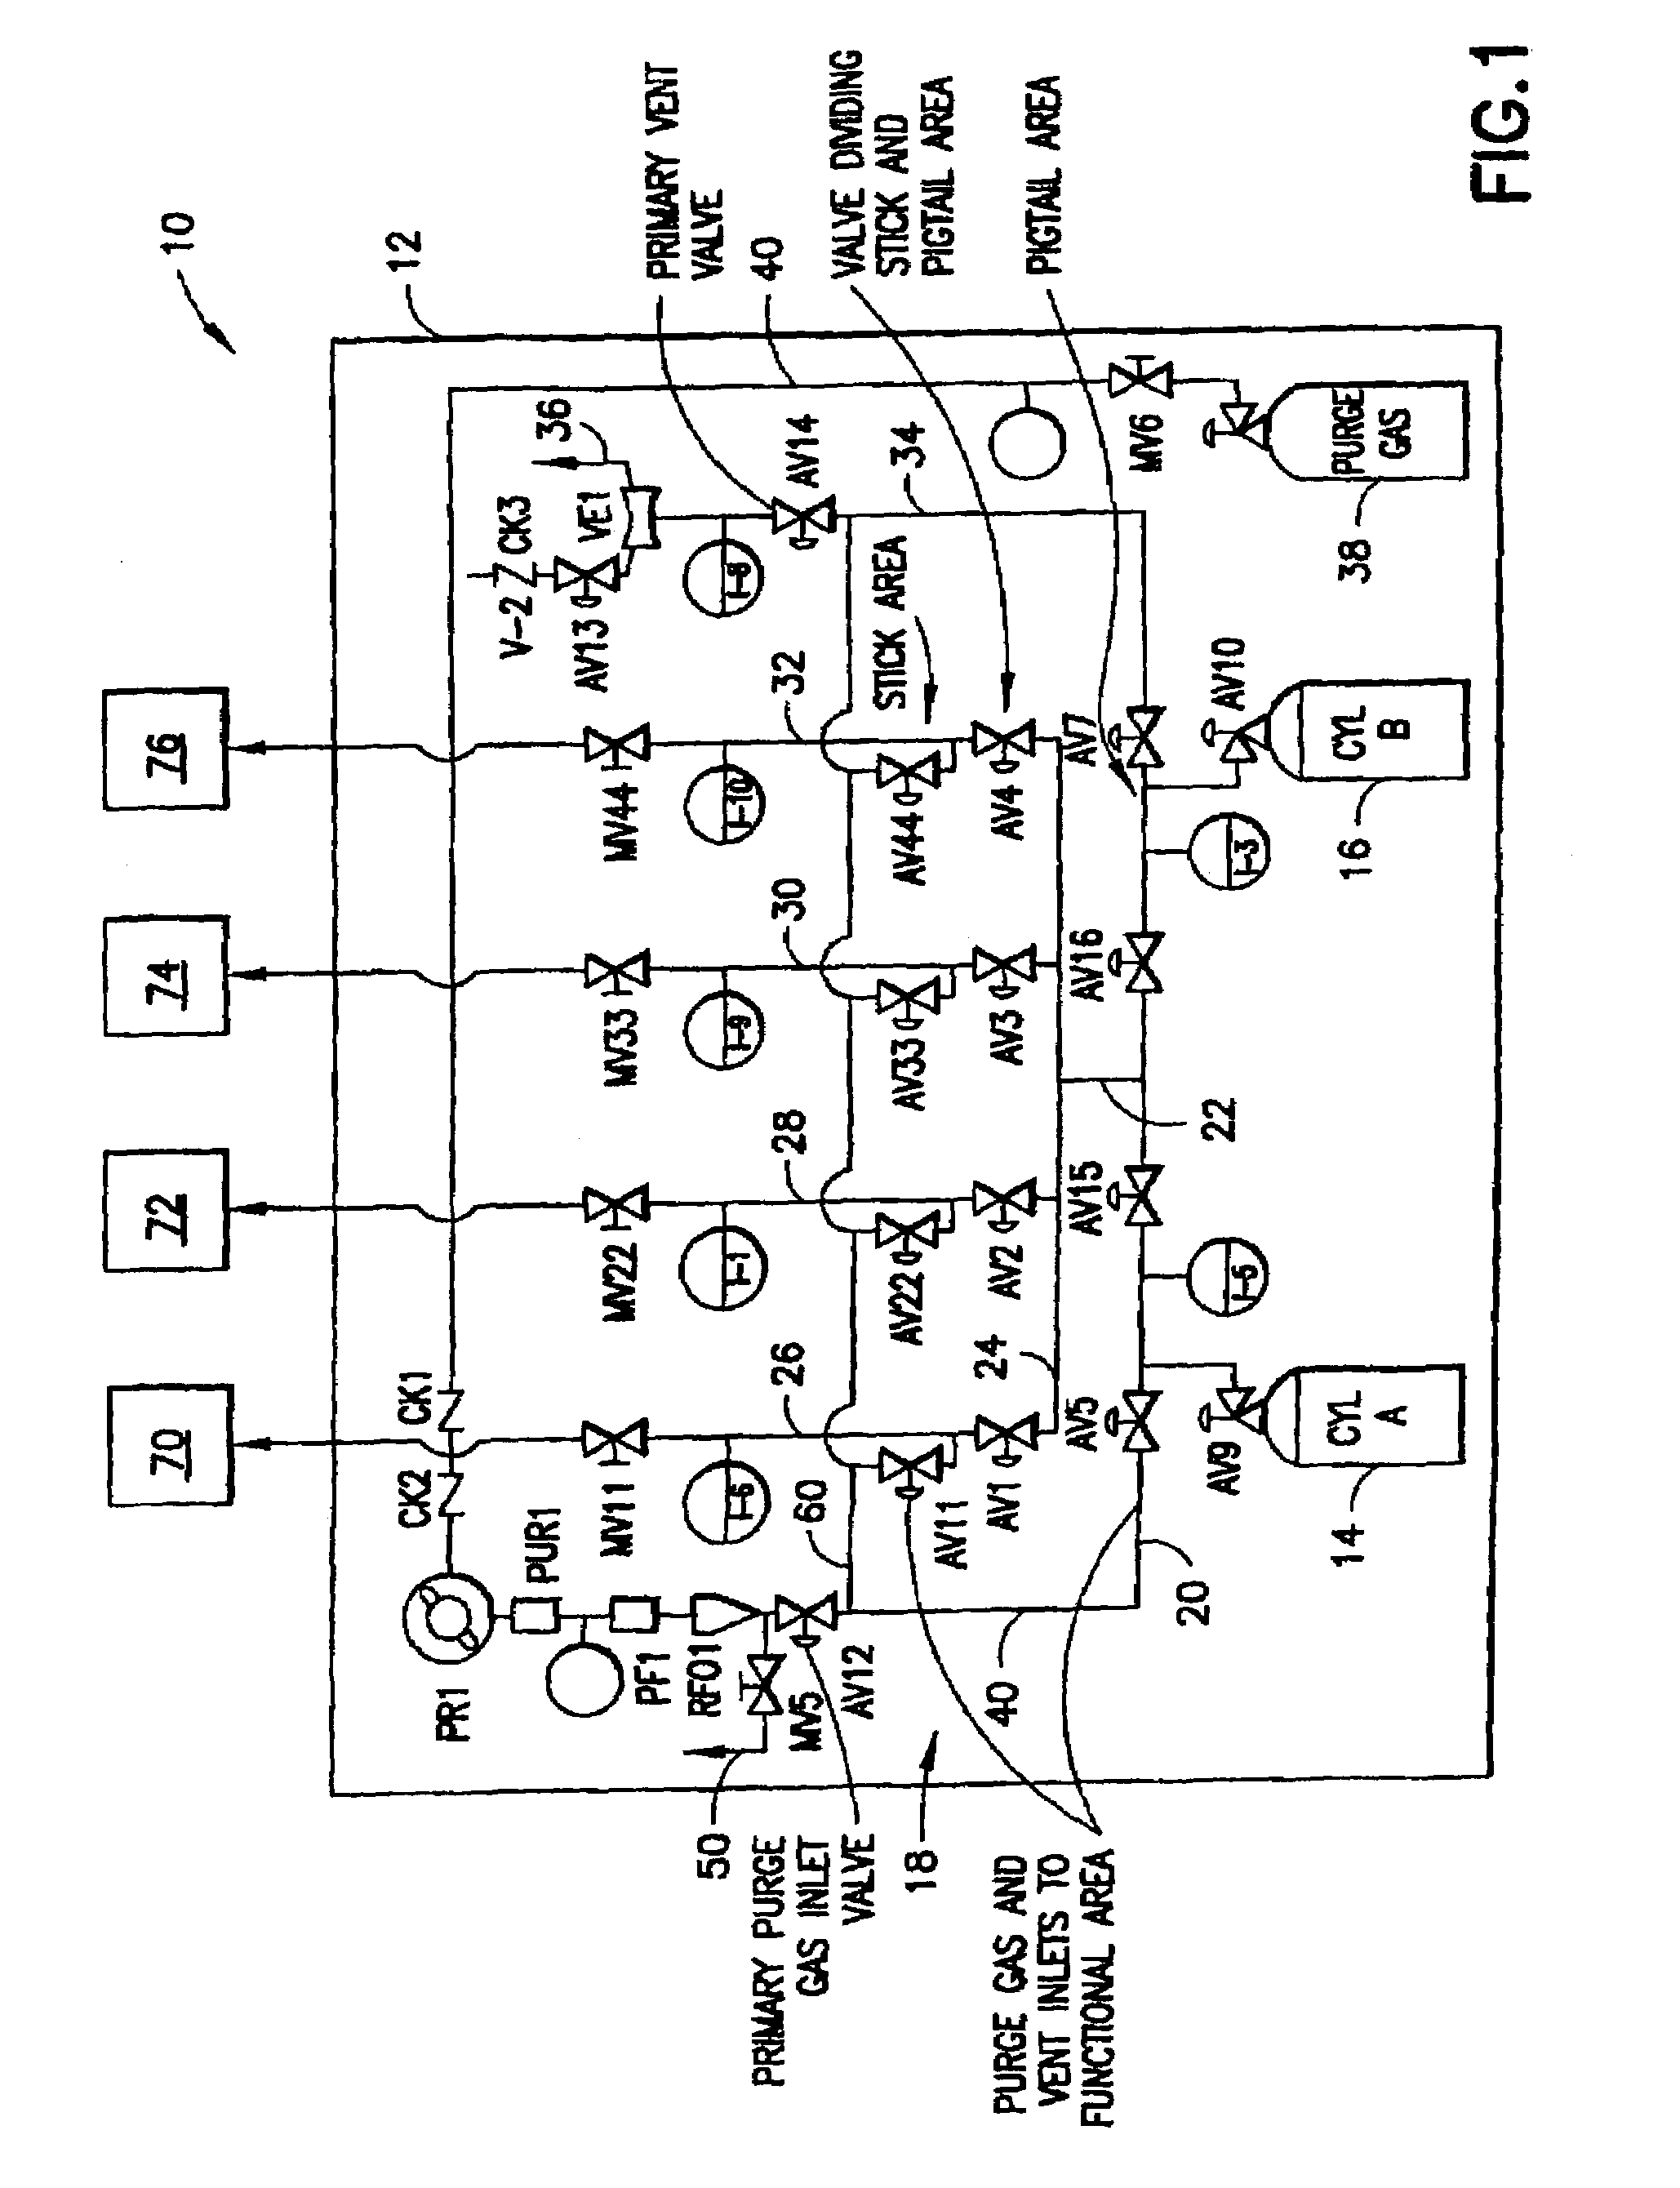 Gas delivery system with integrated valve manifold functionality for sub-atmospheric and super-atmospheric pressure applications